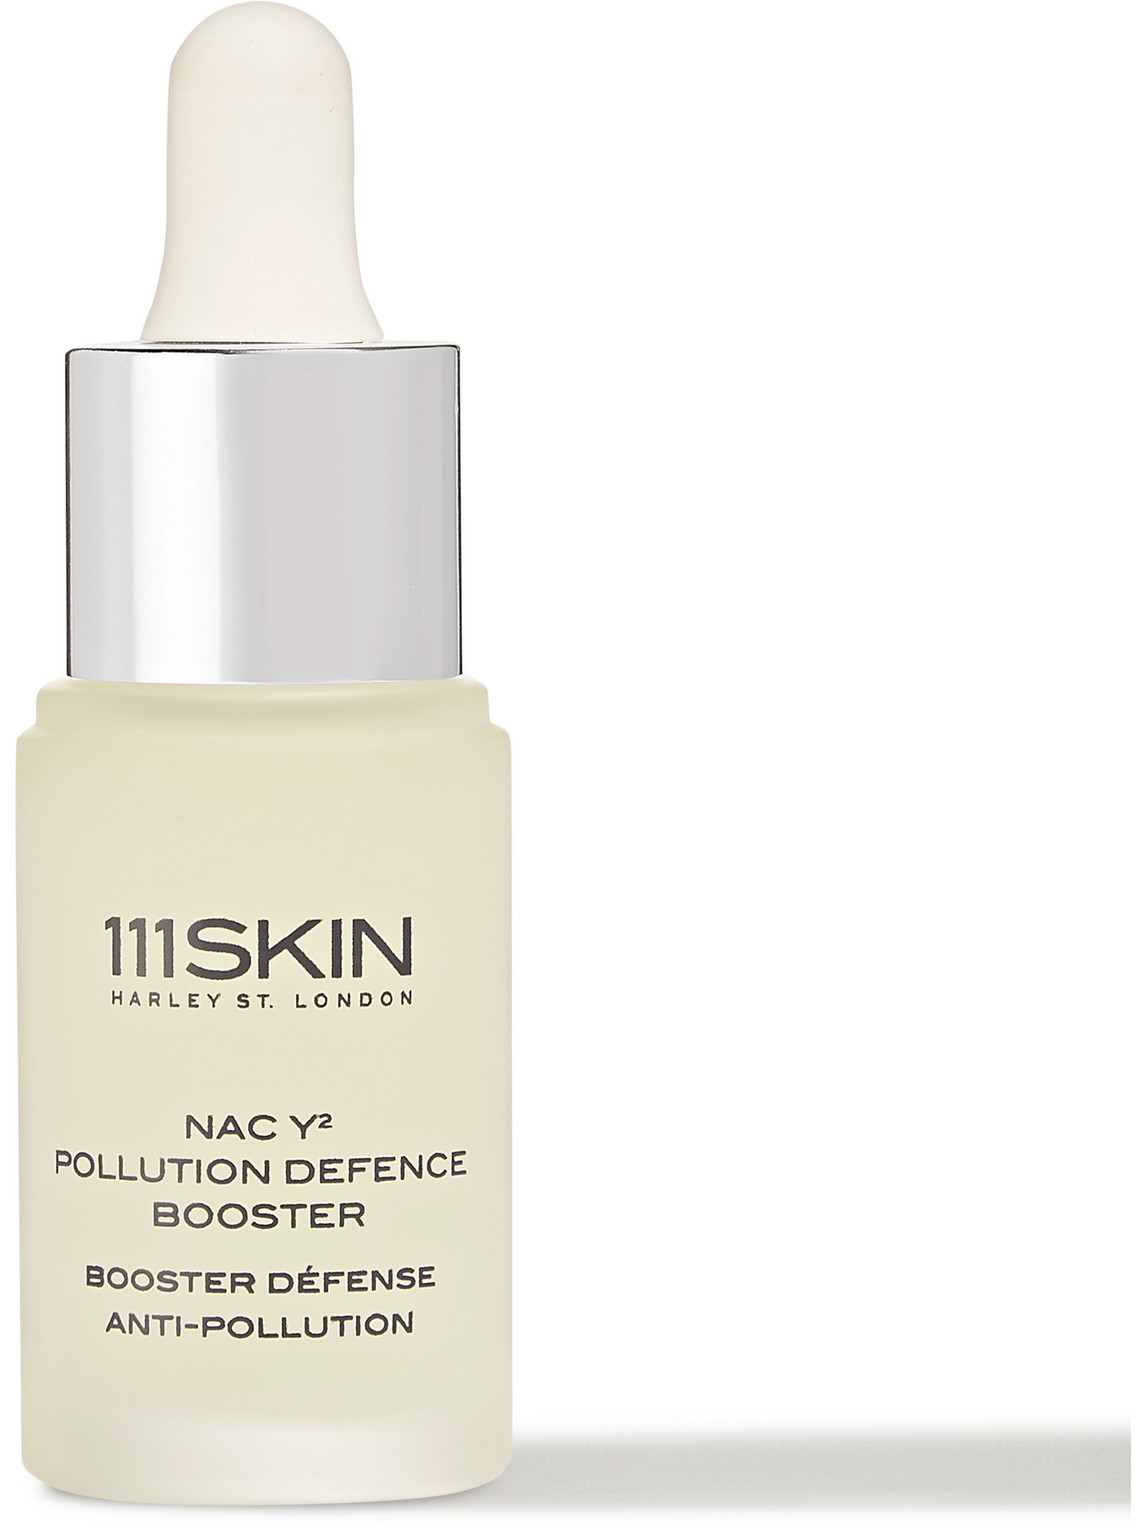 111skin Pollution Defence Booster, 20ml In Colourless